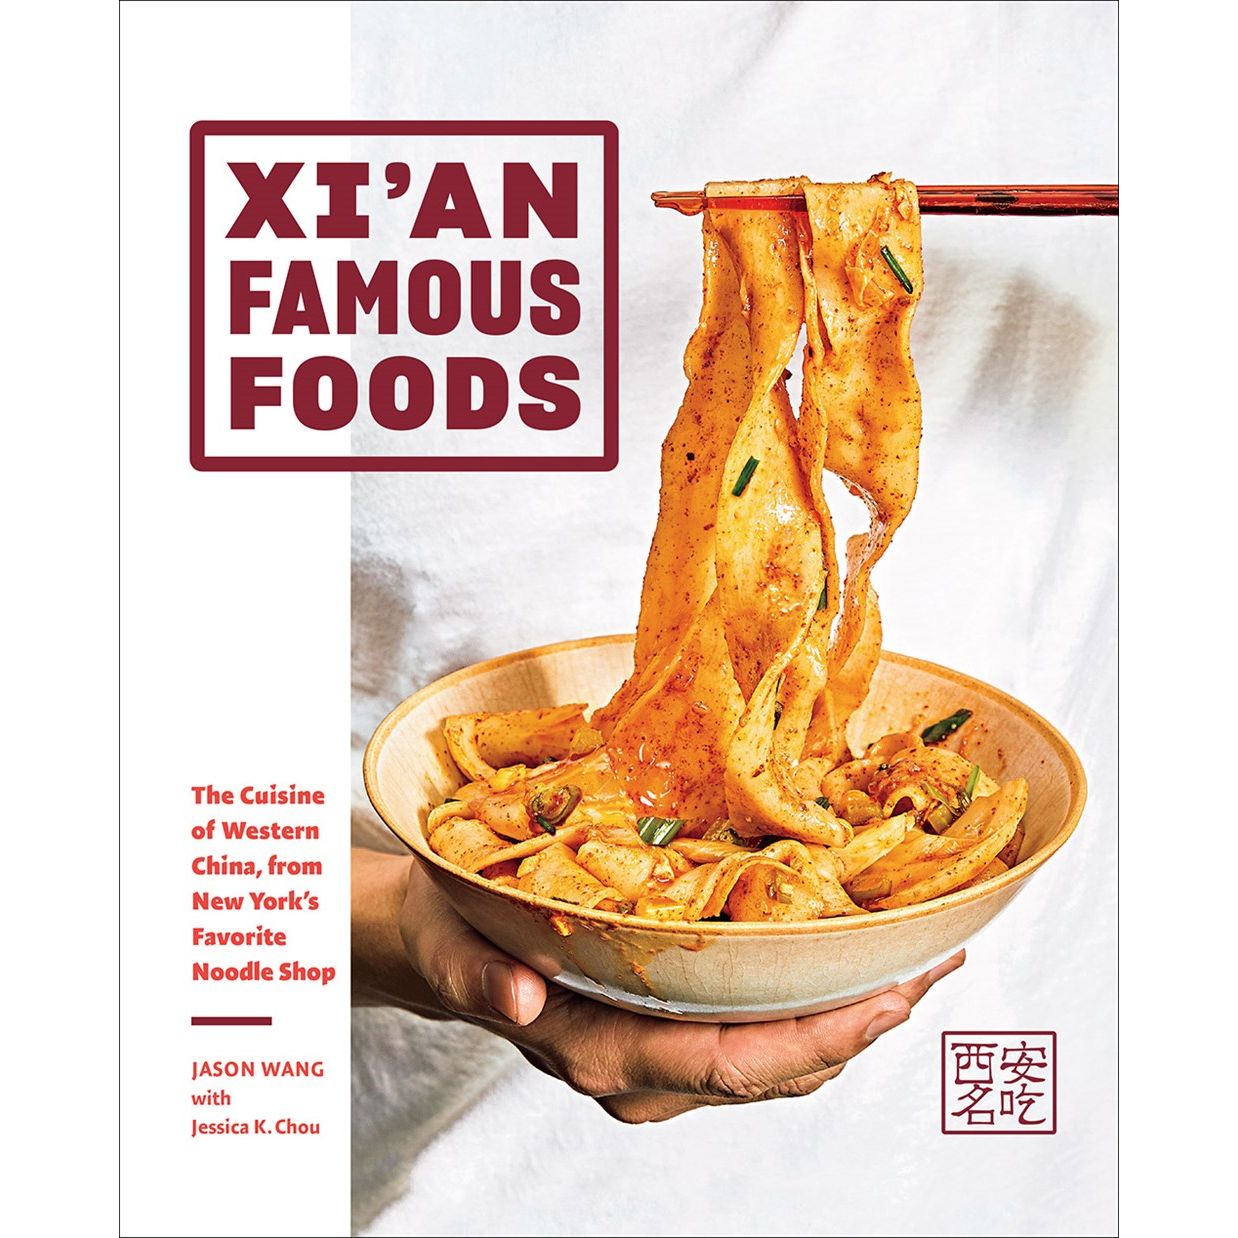 Xi'an Famous Foods: The Cuisine of Western China, From New York's Favorite Noodle Shop  (Jason Wang)